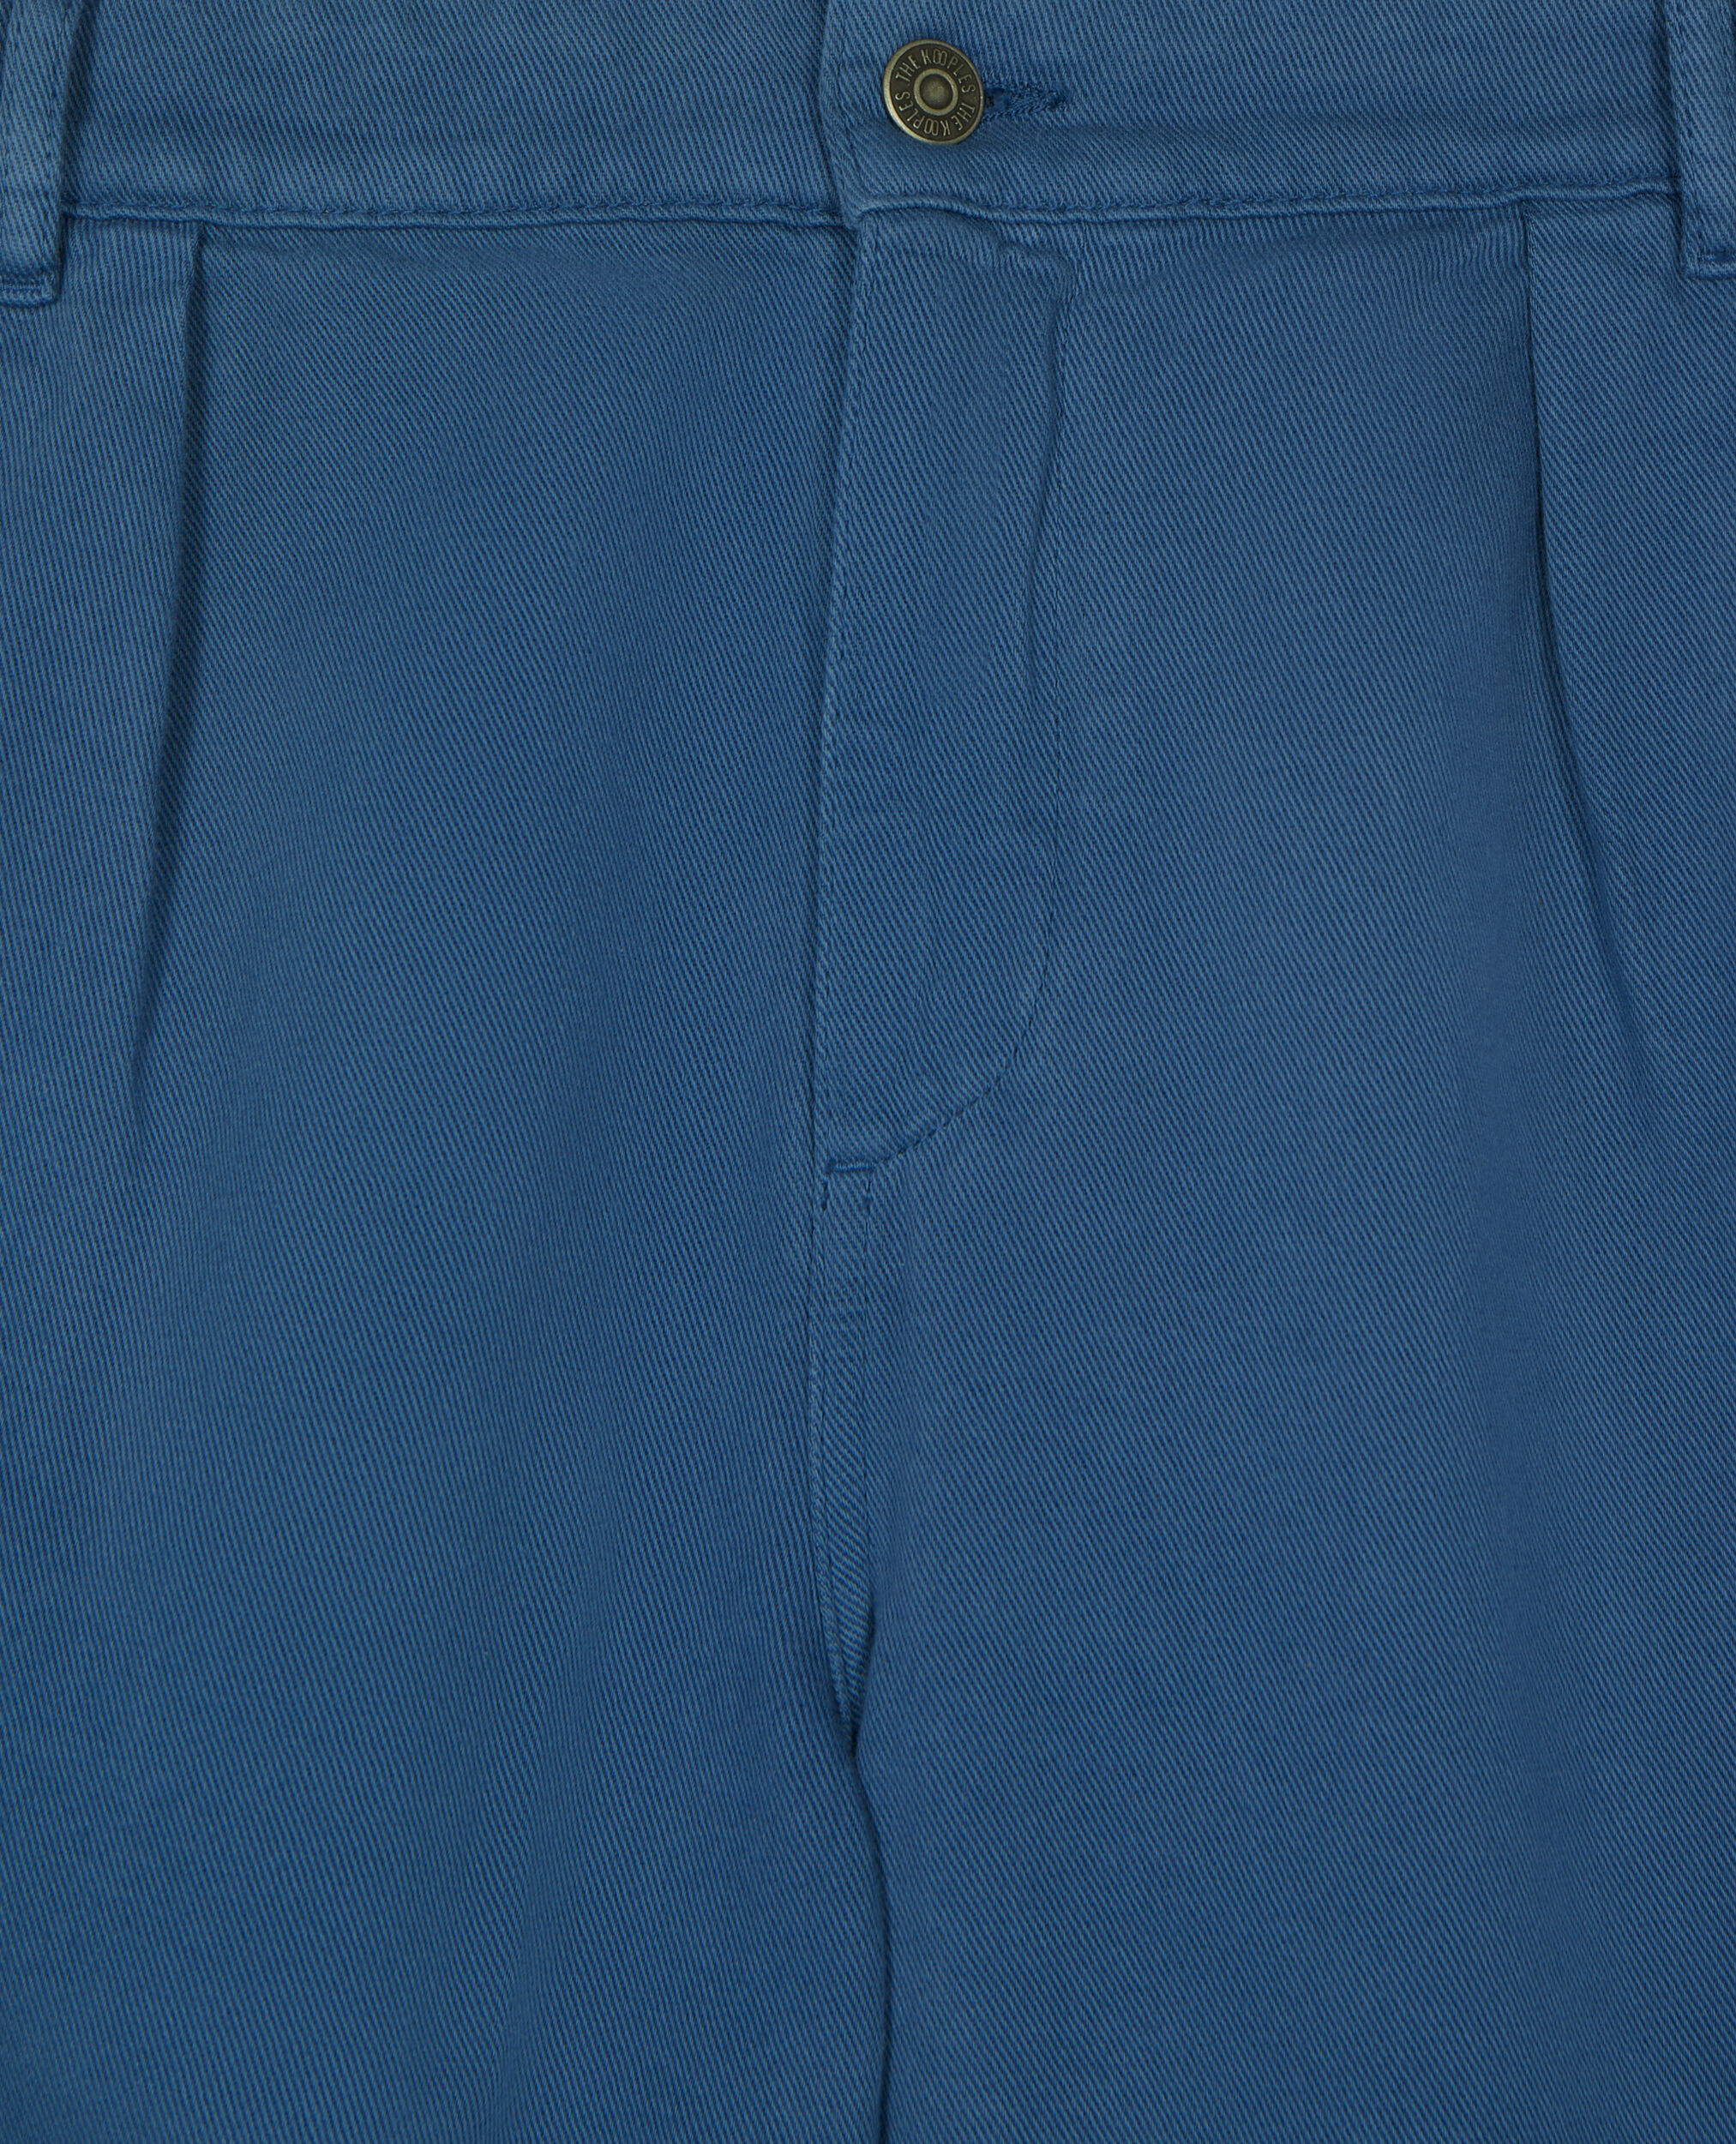 Blue cotton and linen cargo shorts, MIDDLE NAVY, hi-res image number null